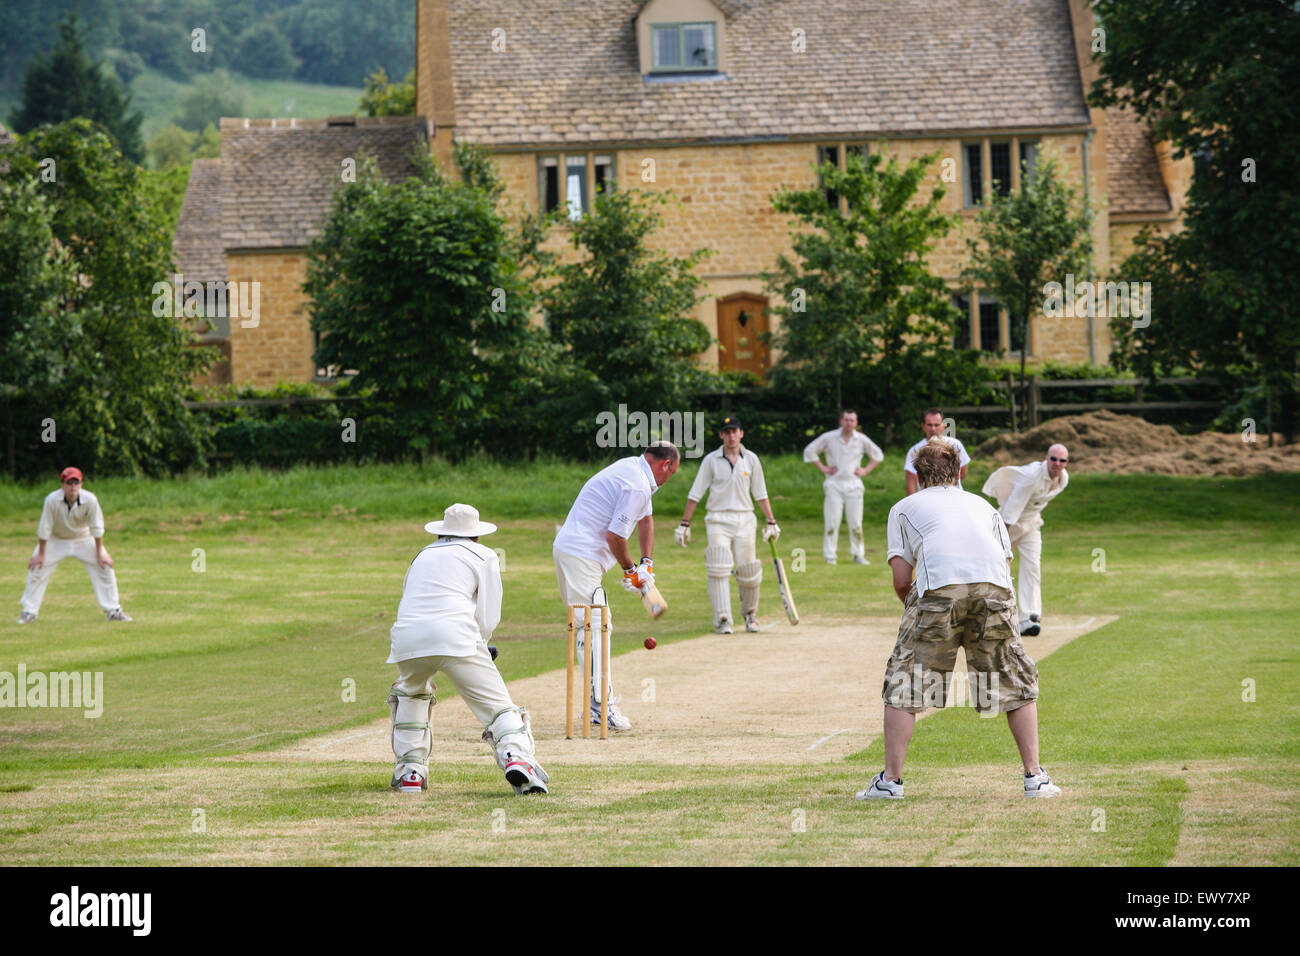 Village cricket game match in at St Philips North Cricket Club,Stanton,Cotswolds,idyllic pretty setting grounds,Gloucestershire,England,English,UK. Stock Photo